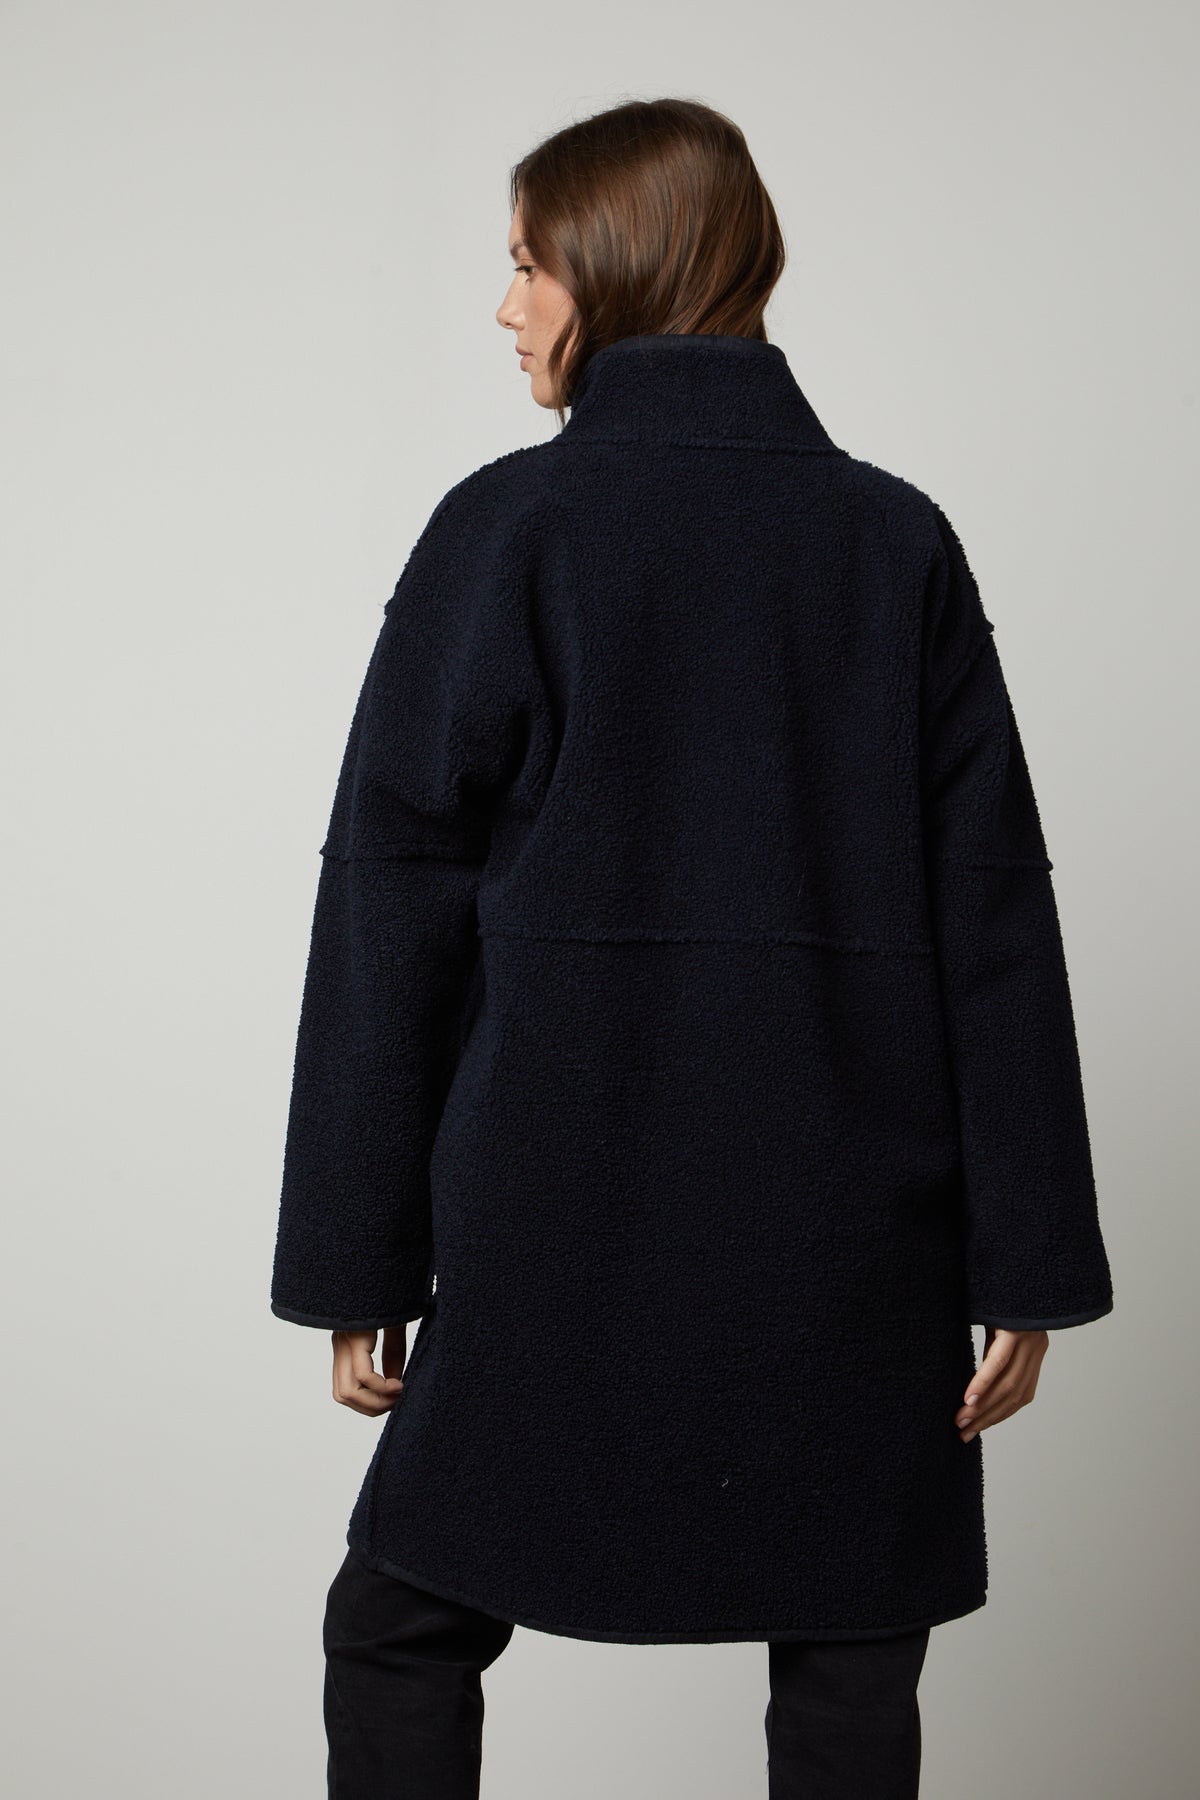 The back view of a woman wearing a Velvet by Graham & Spencer CARA LUX SHERPA REVERSIBLE JACKET.-26897578852545